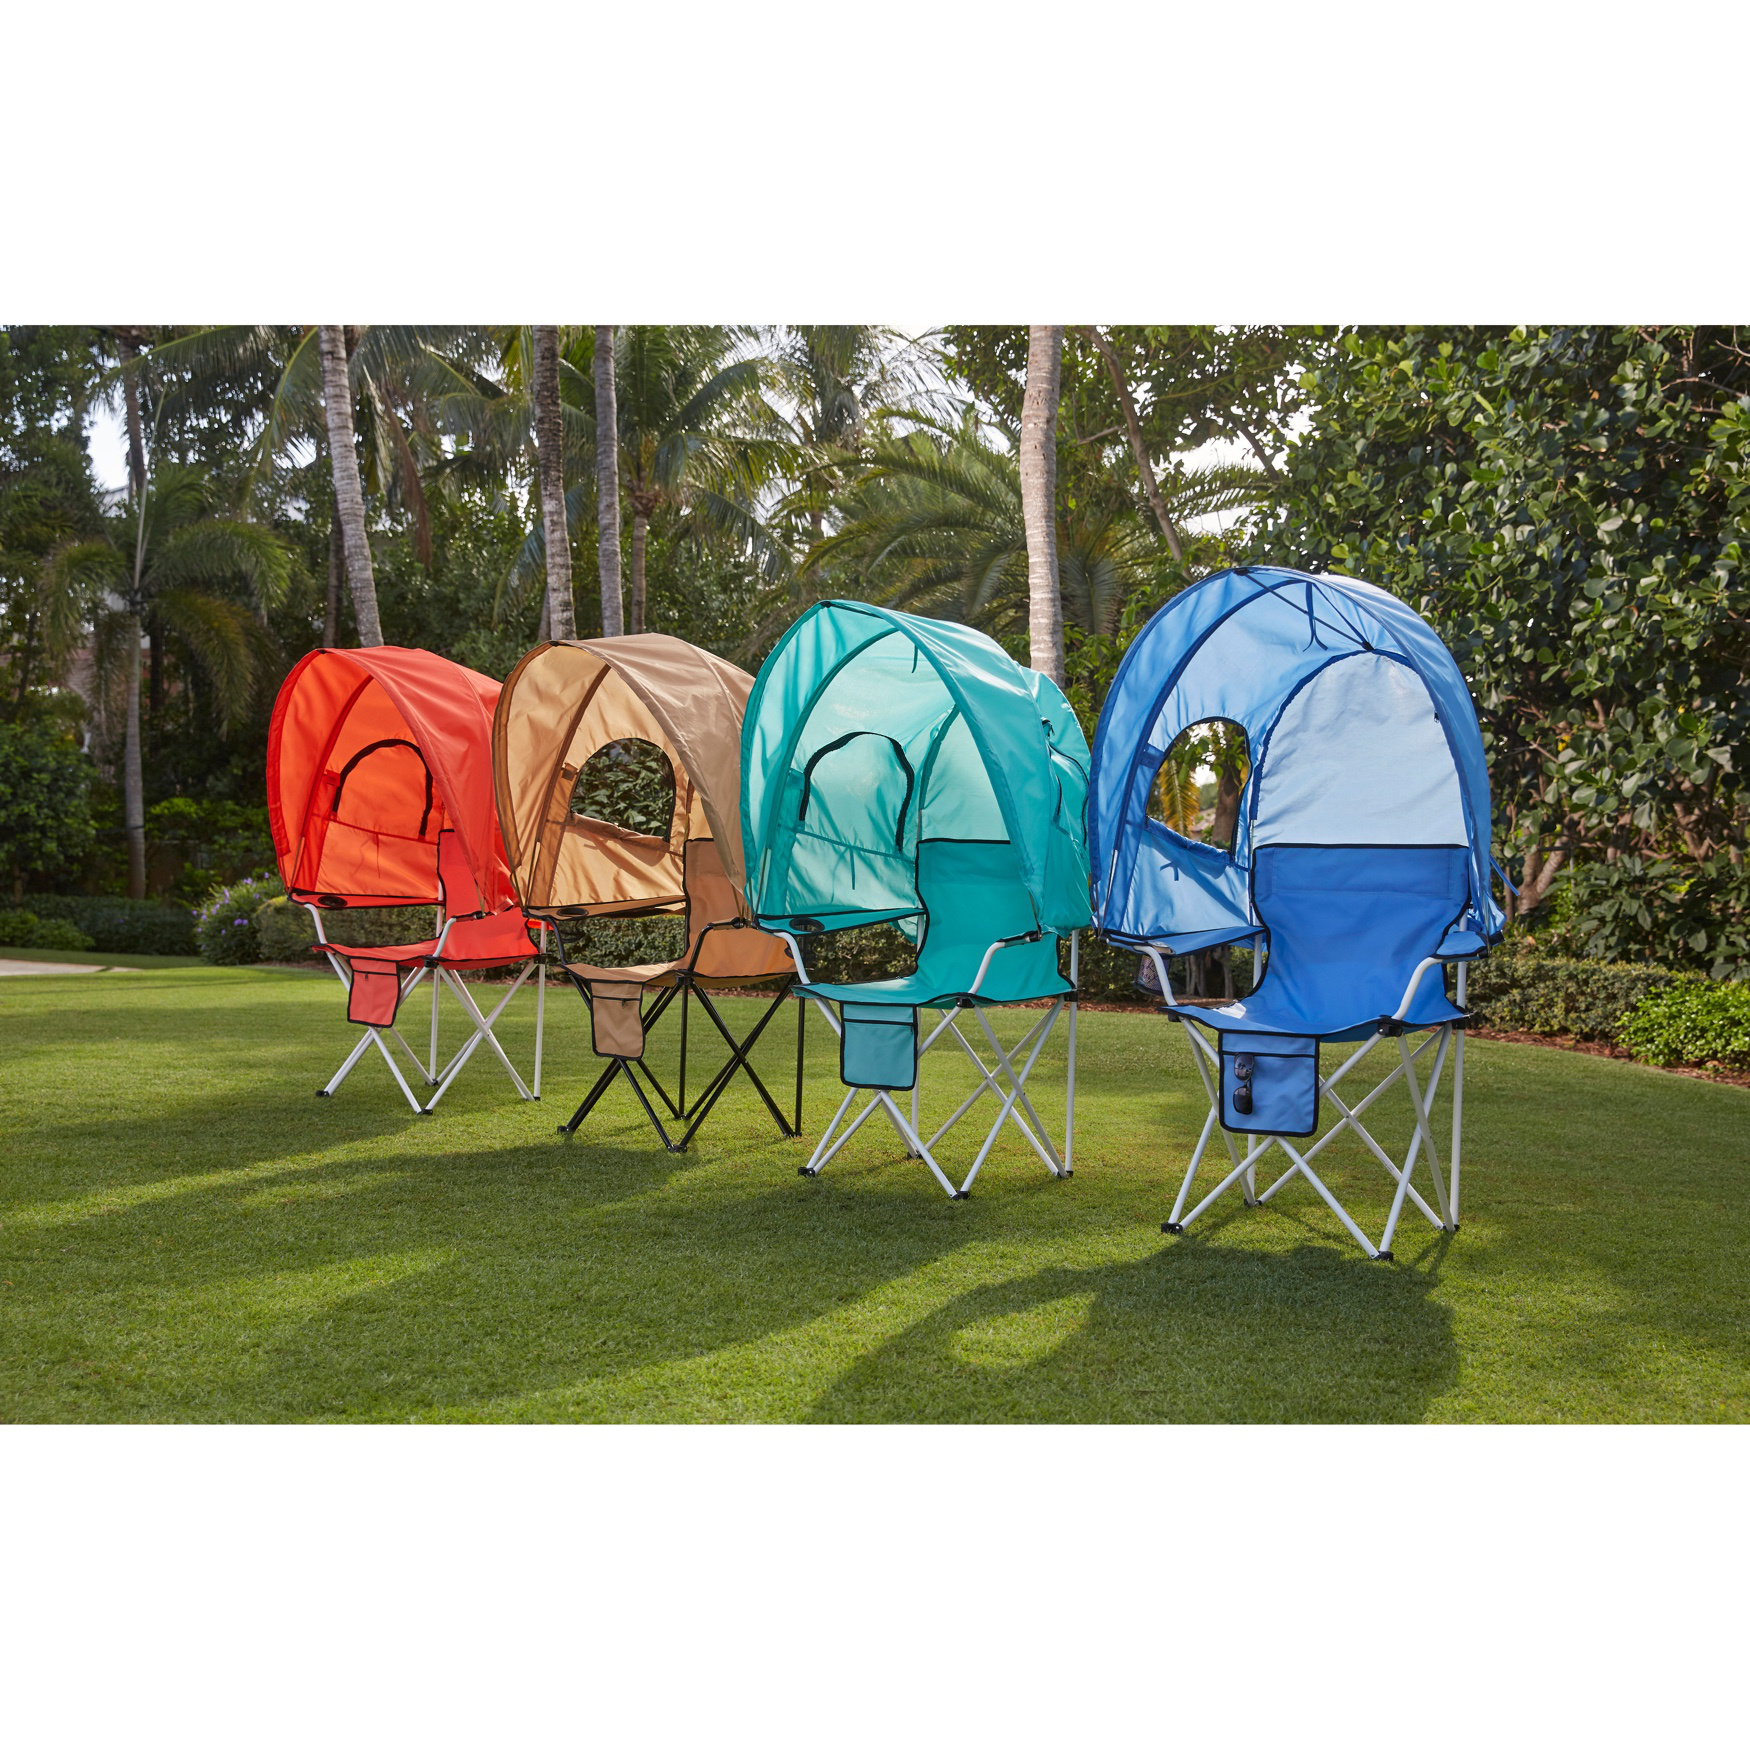 Camp Chair With Canopy Brylane Home, Best Portable Chair With Canopy